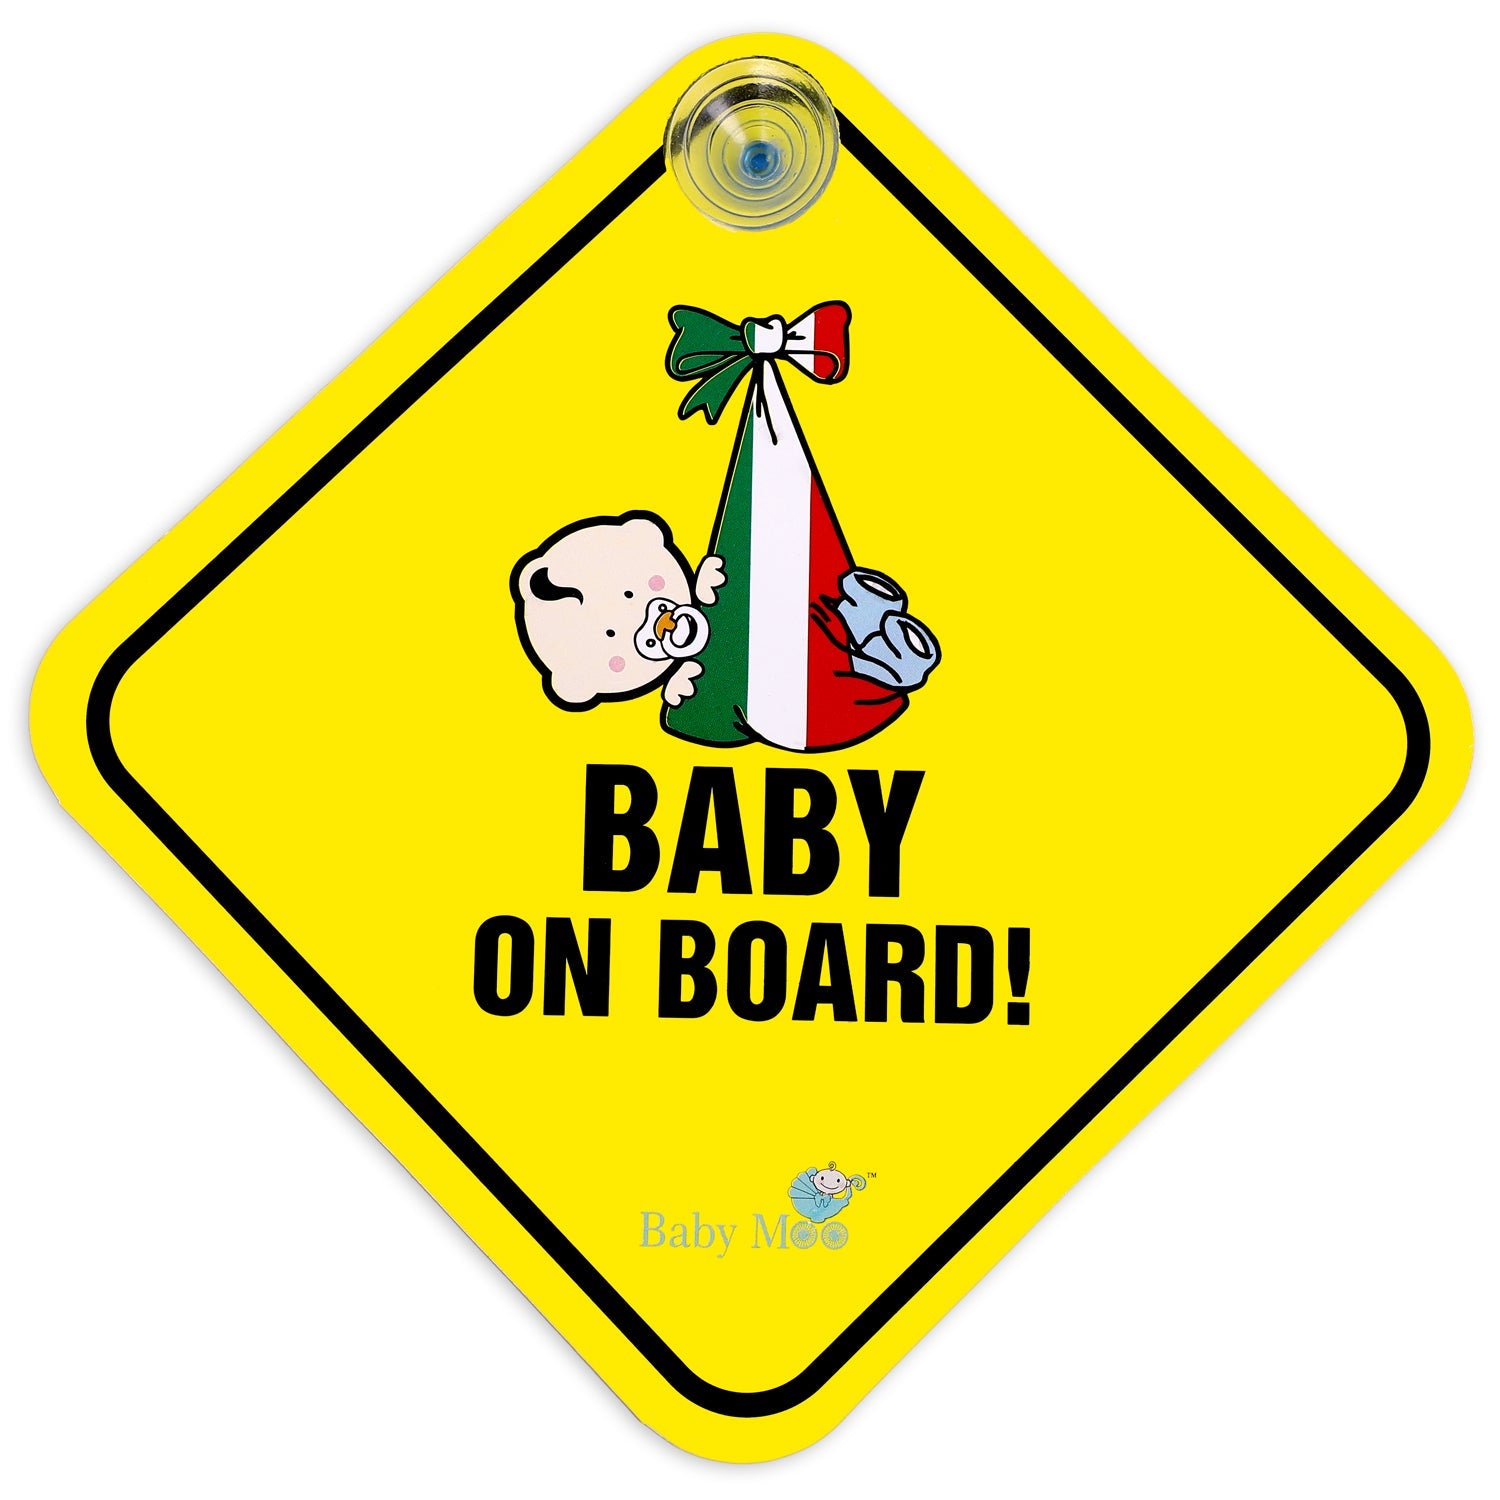 Baby Moo Sleeping Baby Car Safety Sign With Vacuum Suction Cup Clip - Yellow